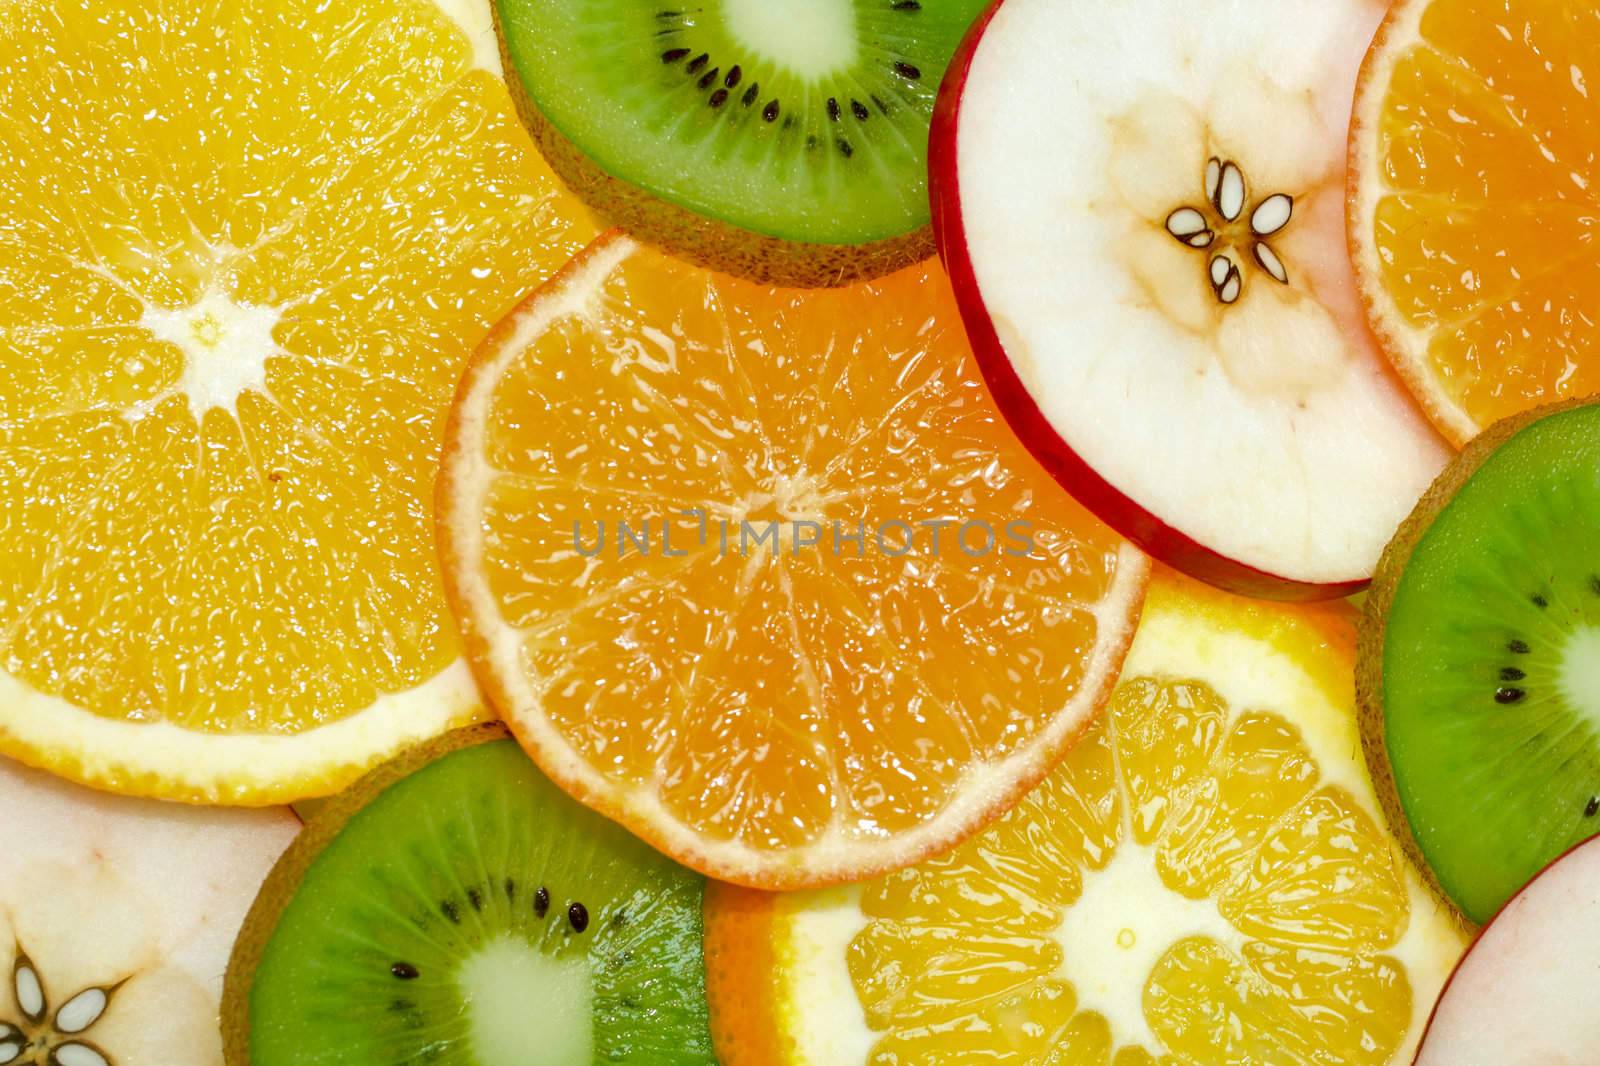 fruits background 3 by Alekcey